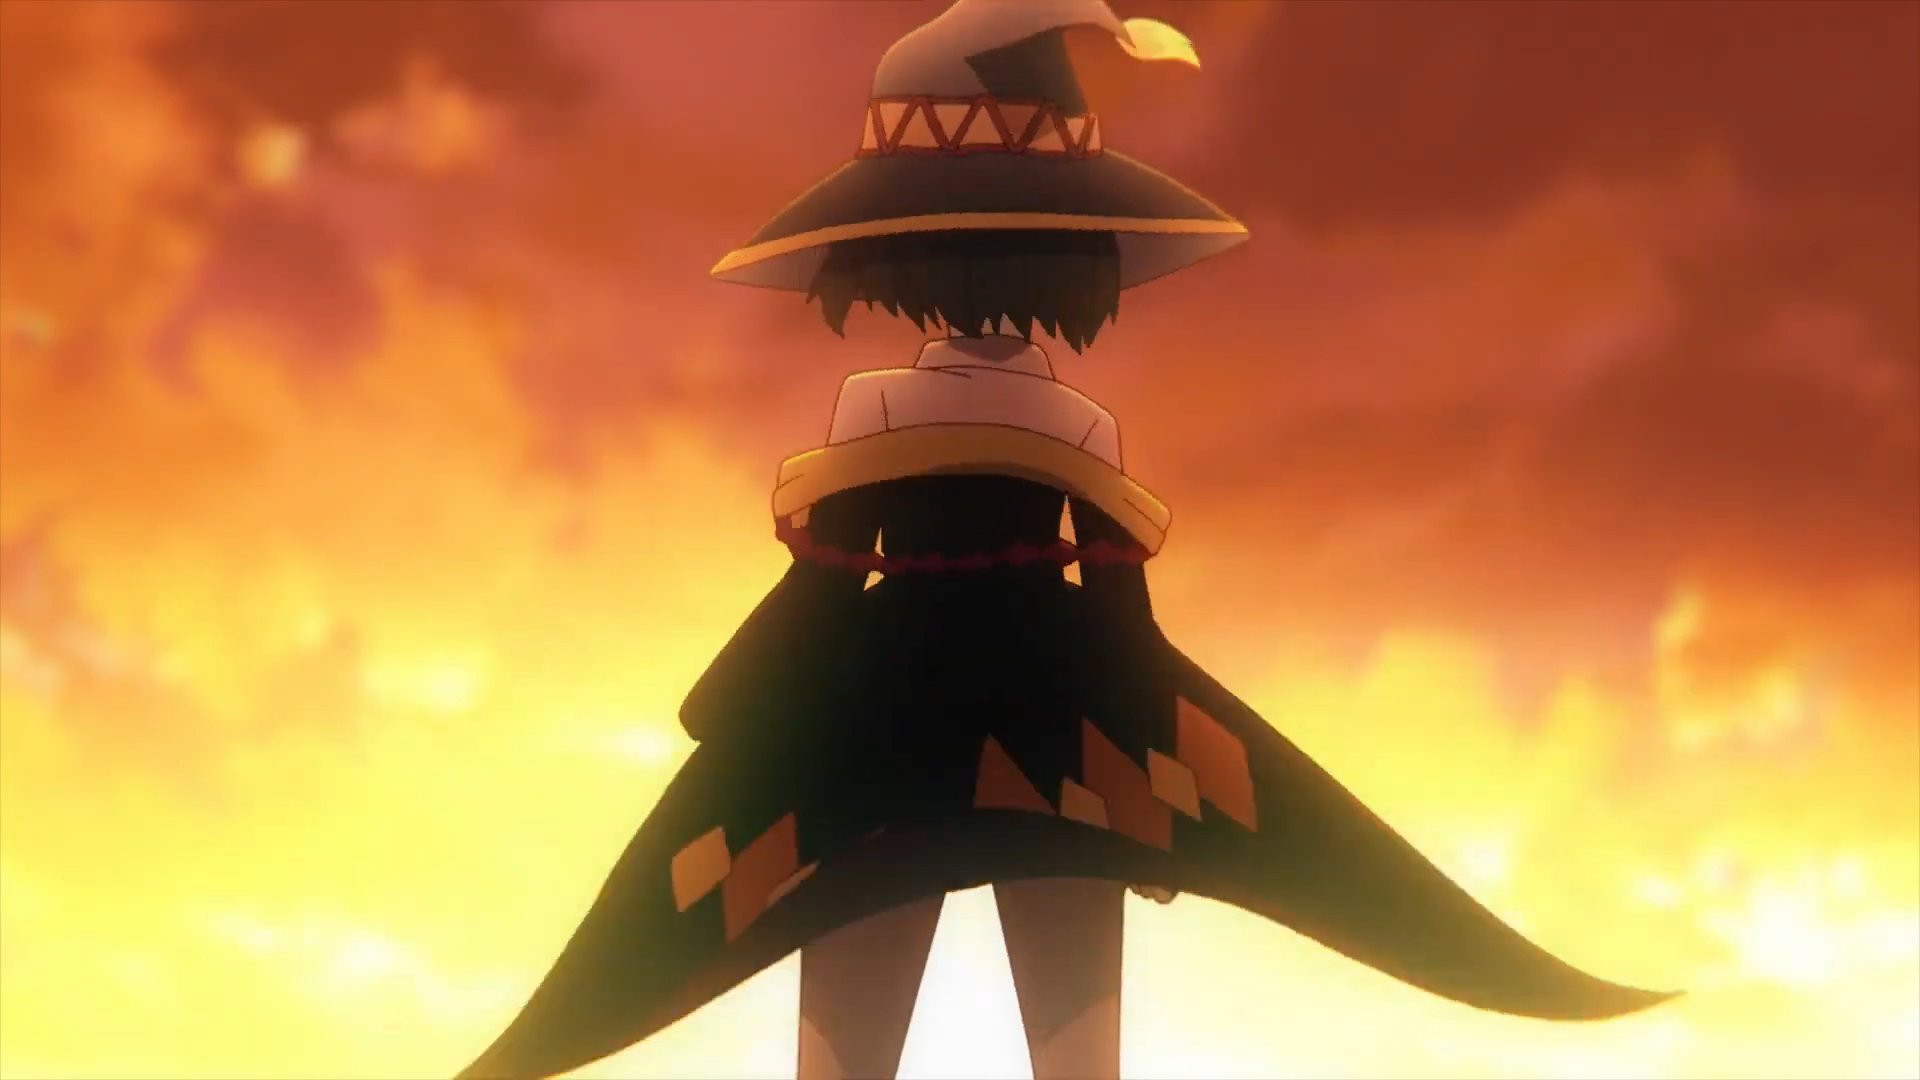 Anime Corner News - JUST IN: KonoSuba: An Explosion On This Wonderful  World! Megumin spin-off anime will get its first trailer on August 26!  More: acani.me/konosuba-megumin-aug